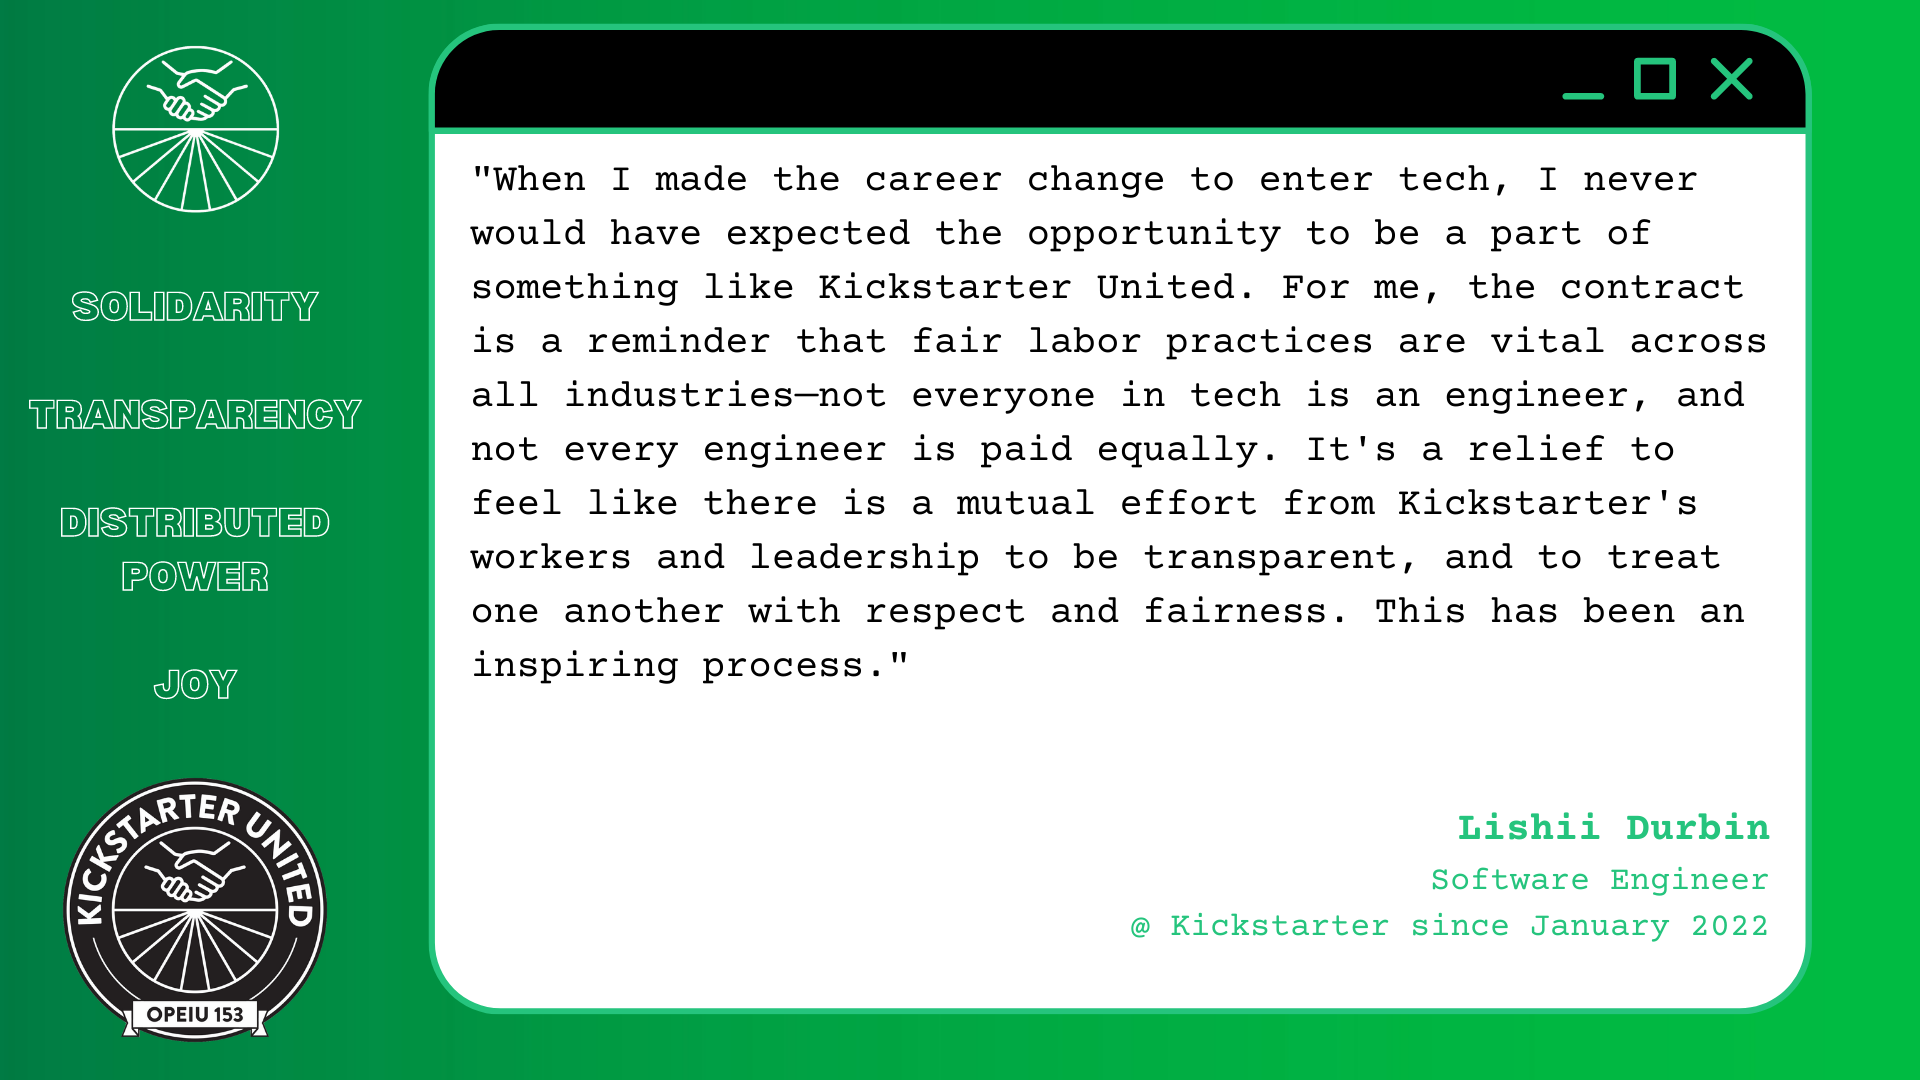 "When I made the career change to enter tech, I never would have expected the opportunity to be a part of something like Kickstarter United. For me, the contract is a reminder that fair labor practices are vital across all industries—not everyone in tech is an engineer, and not every engineer is paid equally. It's a relief to feel like there is a mutual effort from Kickstarter's workers and leadership to be transparent, and to treat one another with respect and fairness. This has been an inspiring process." Liishi Durbin, Software Engineer @ Kickstarter since January 2022